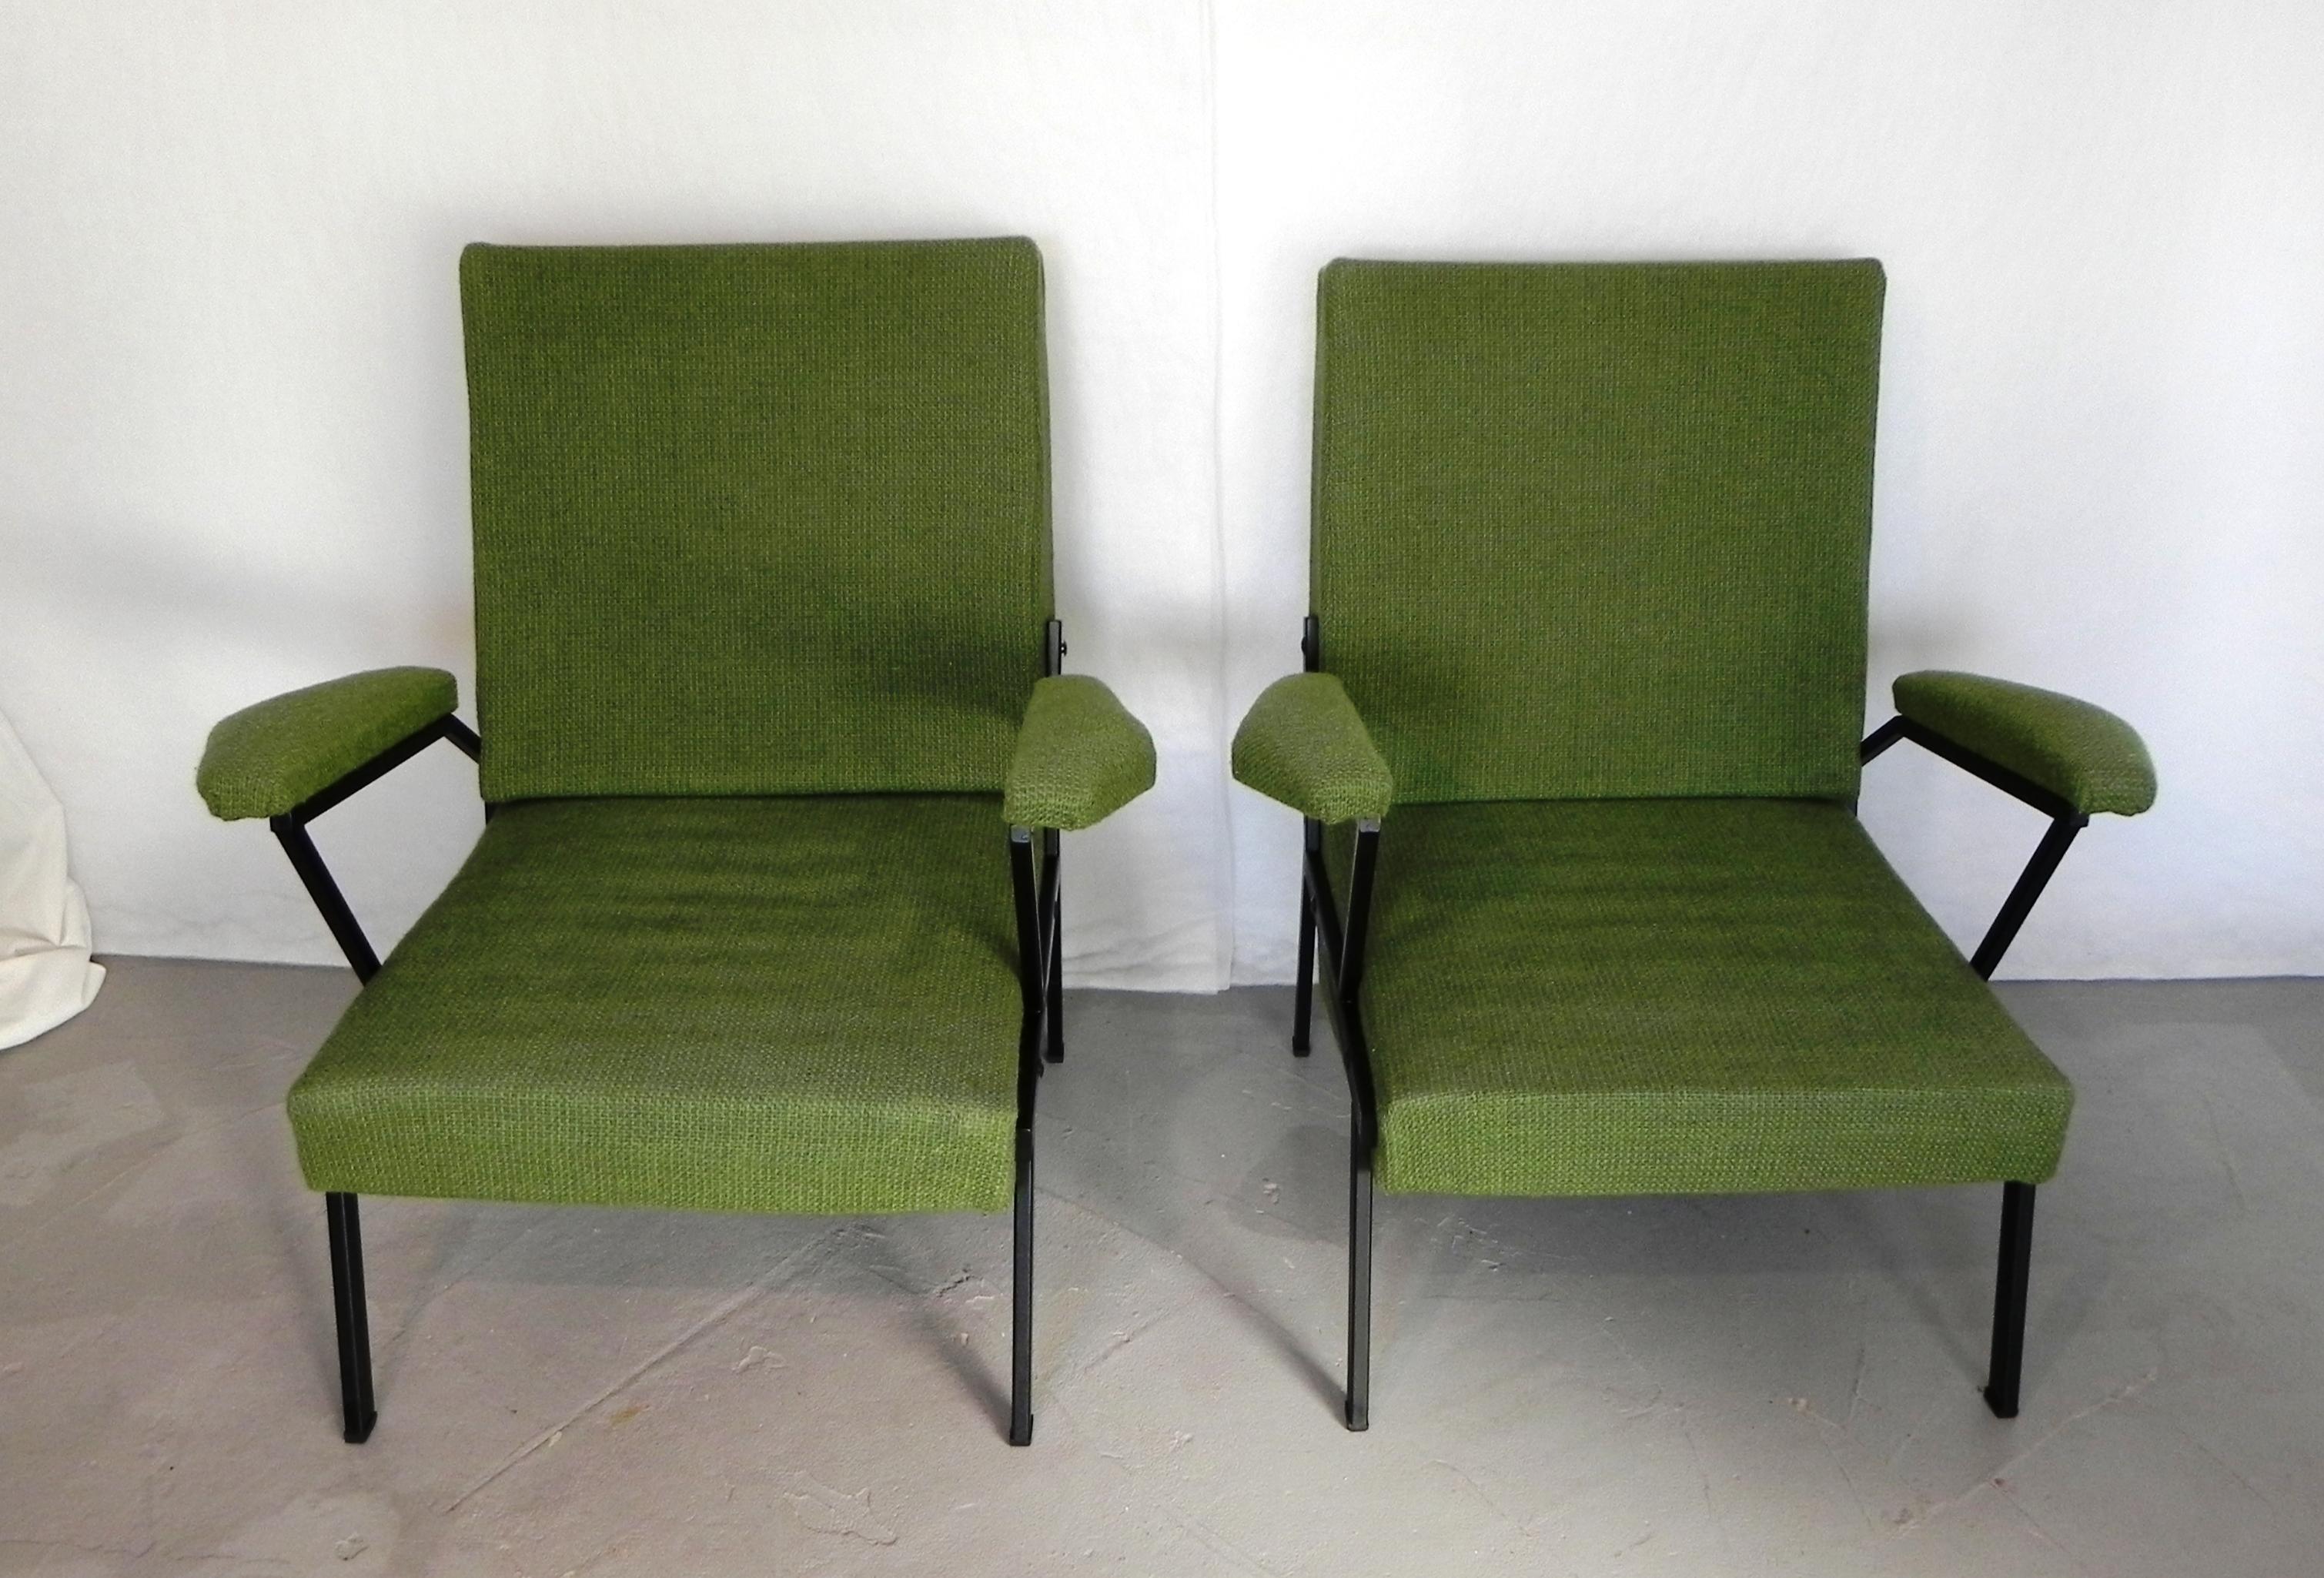 Mid-Century Modern 2 armchairs from the 1960s